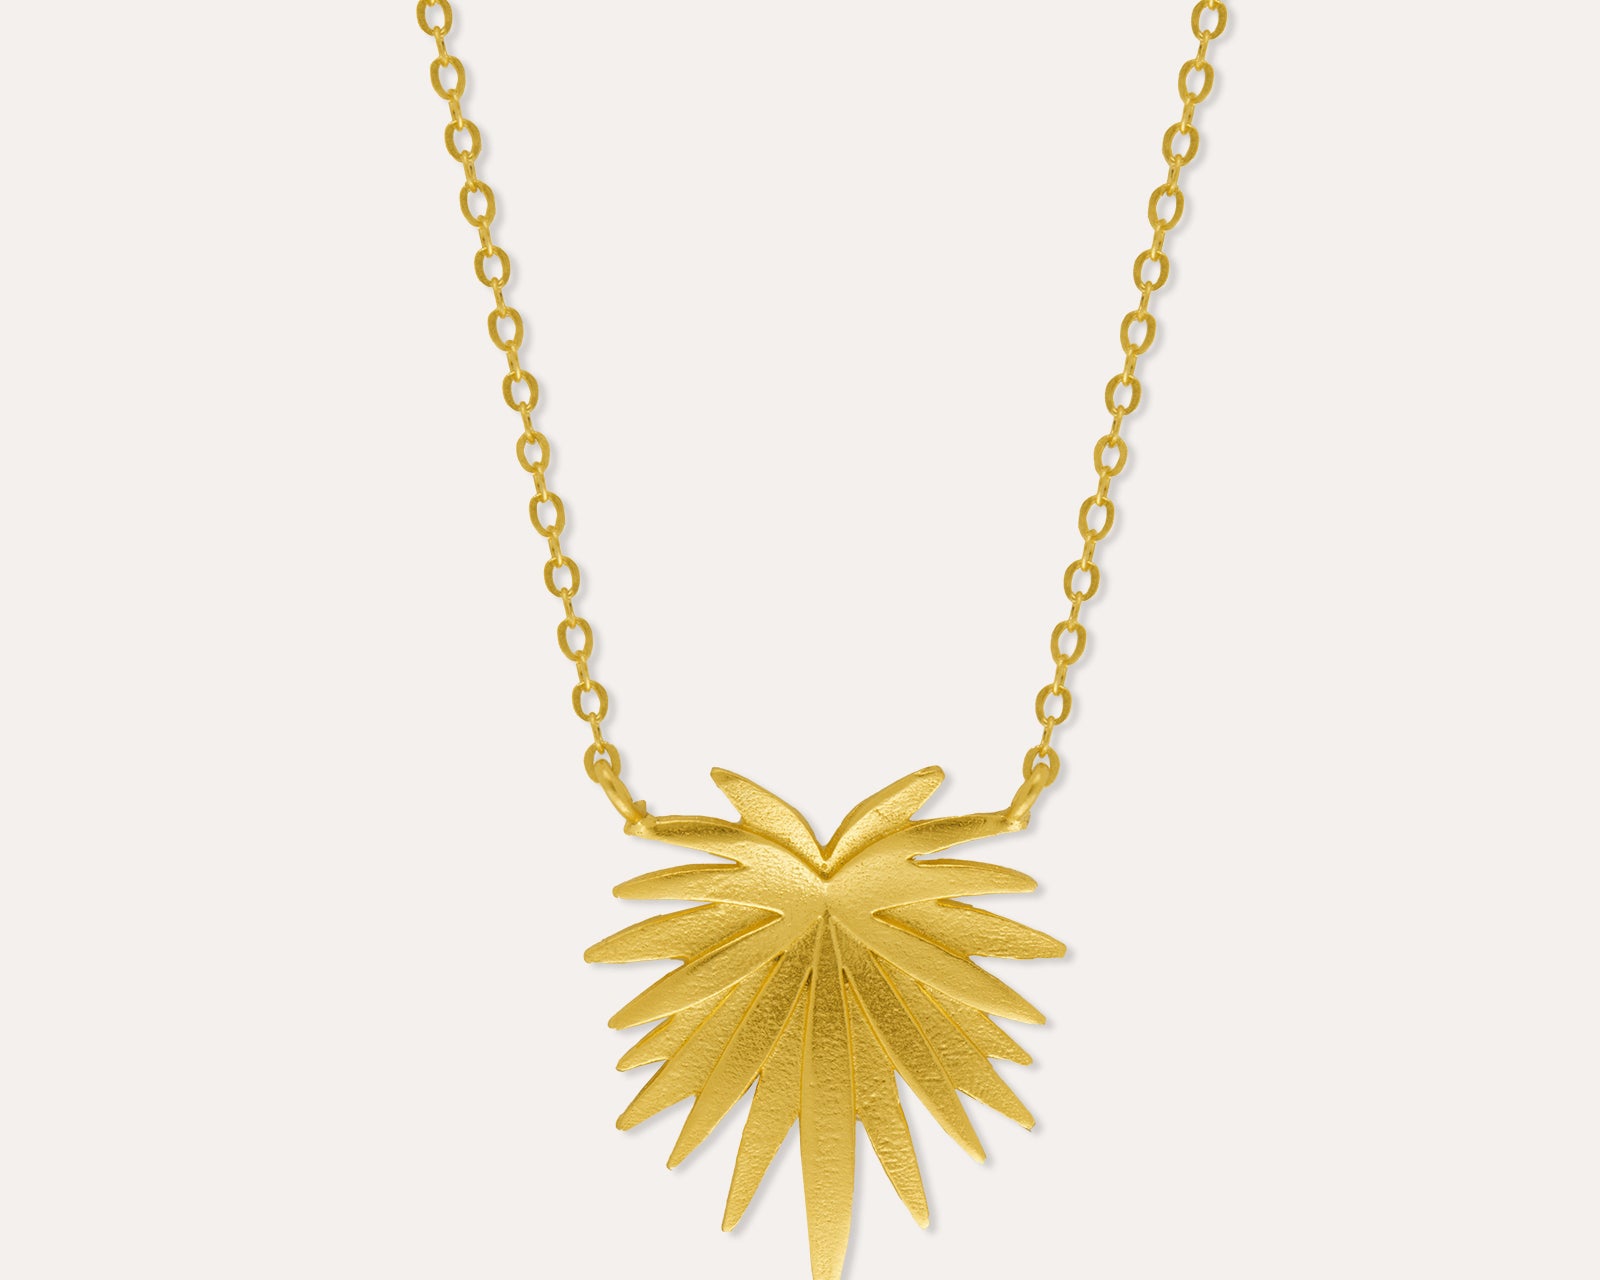 Palma Gold Pendant Necklace | Sustainable Jewellery by Ottoman Hands